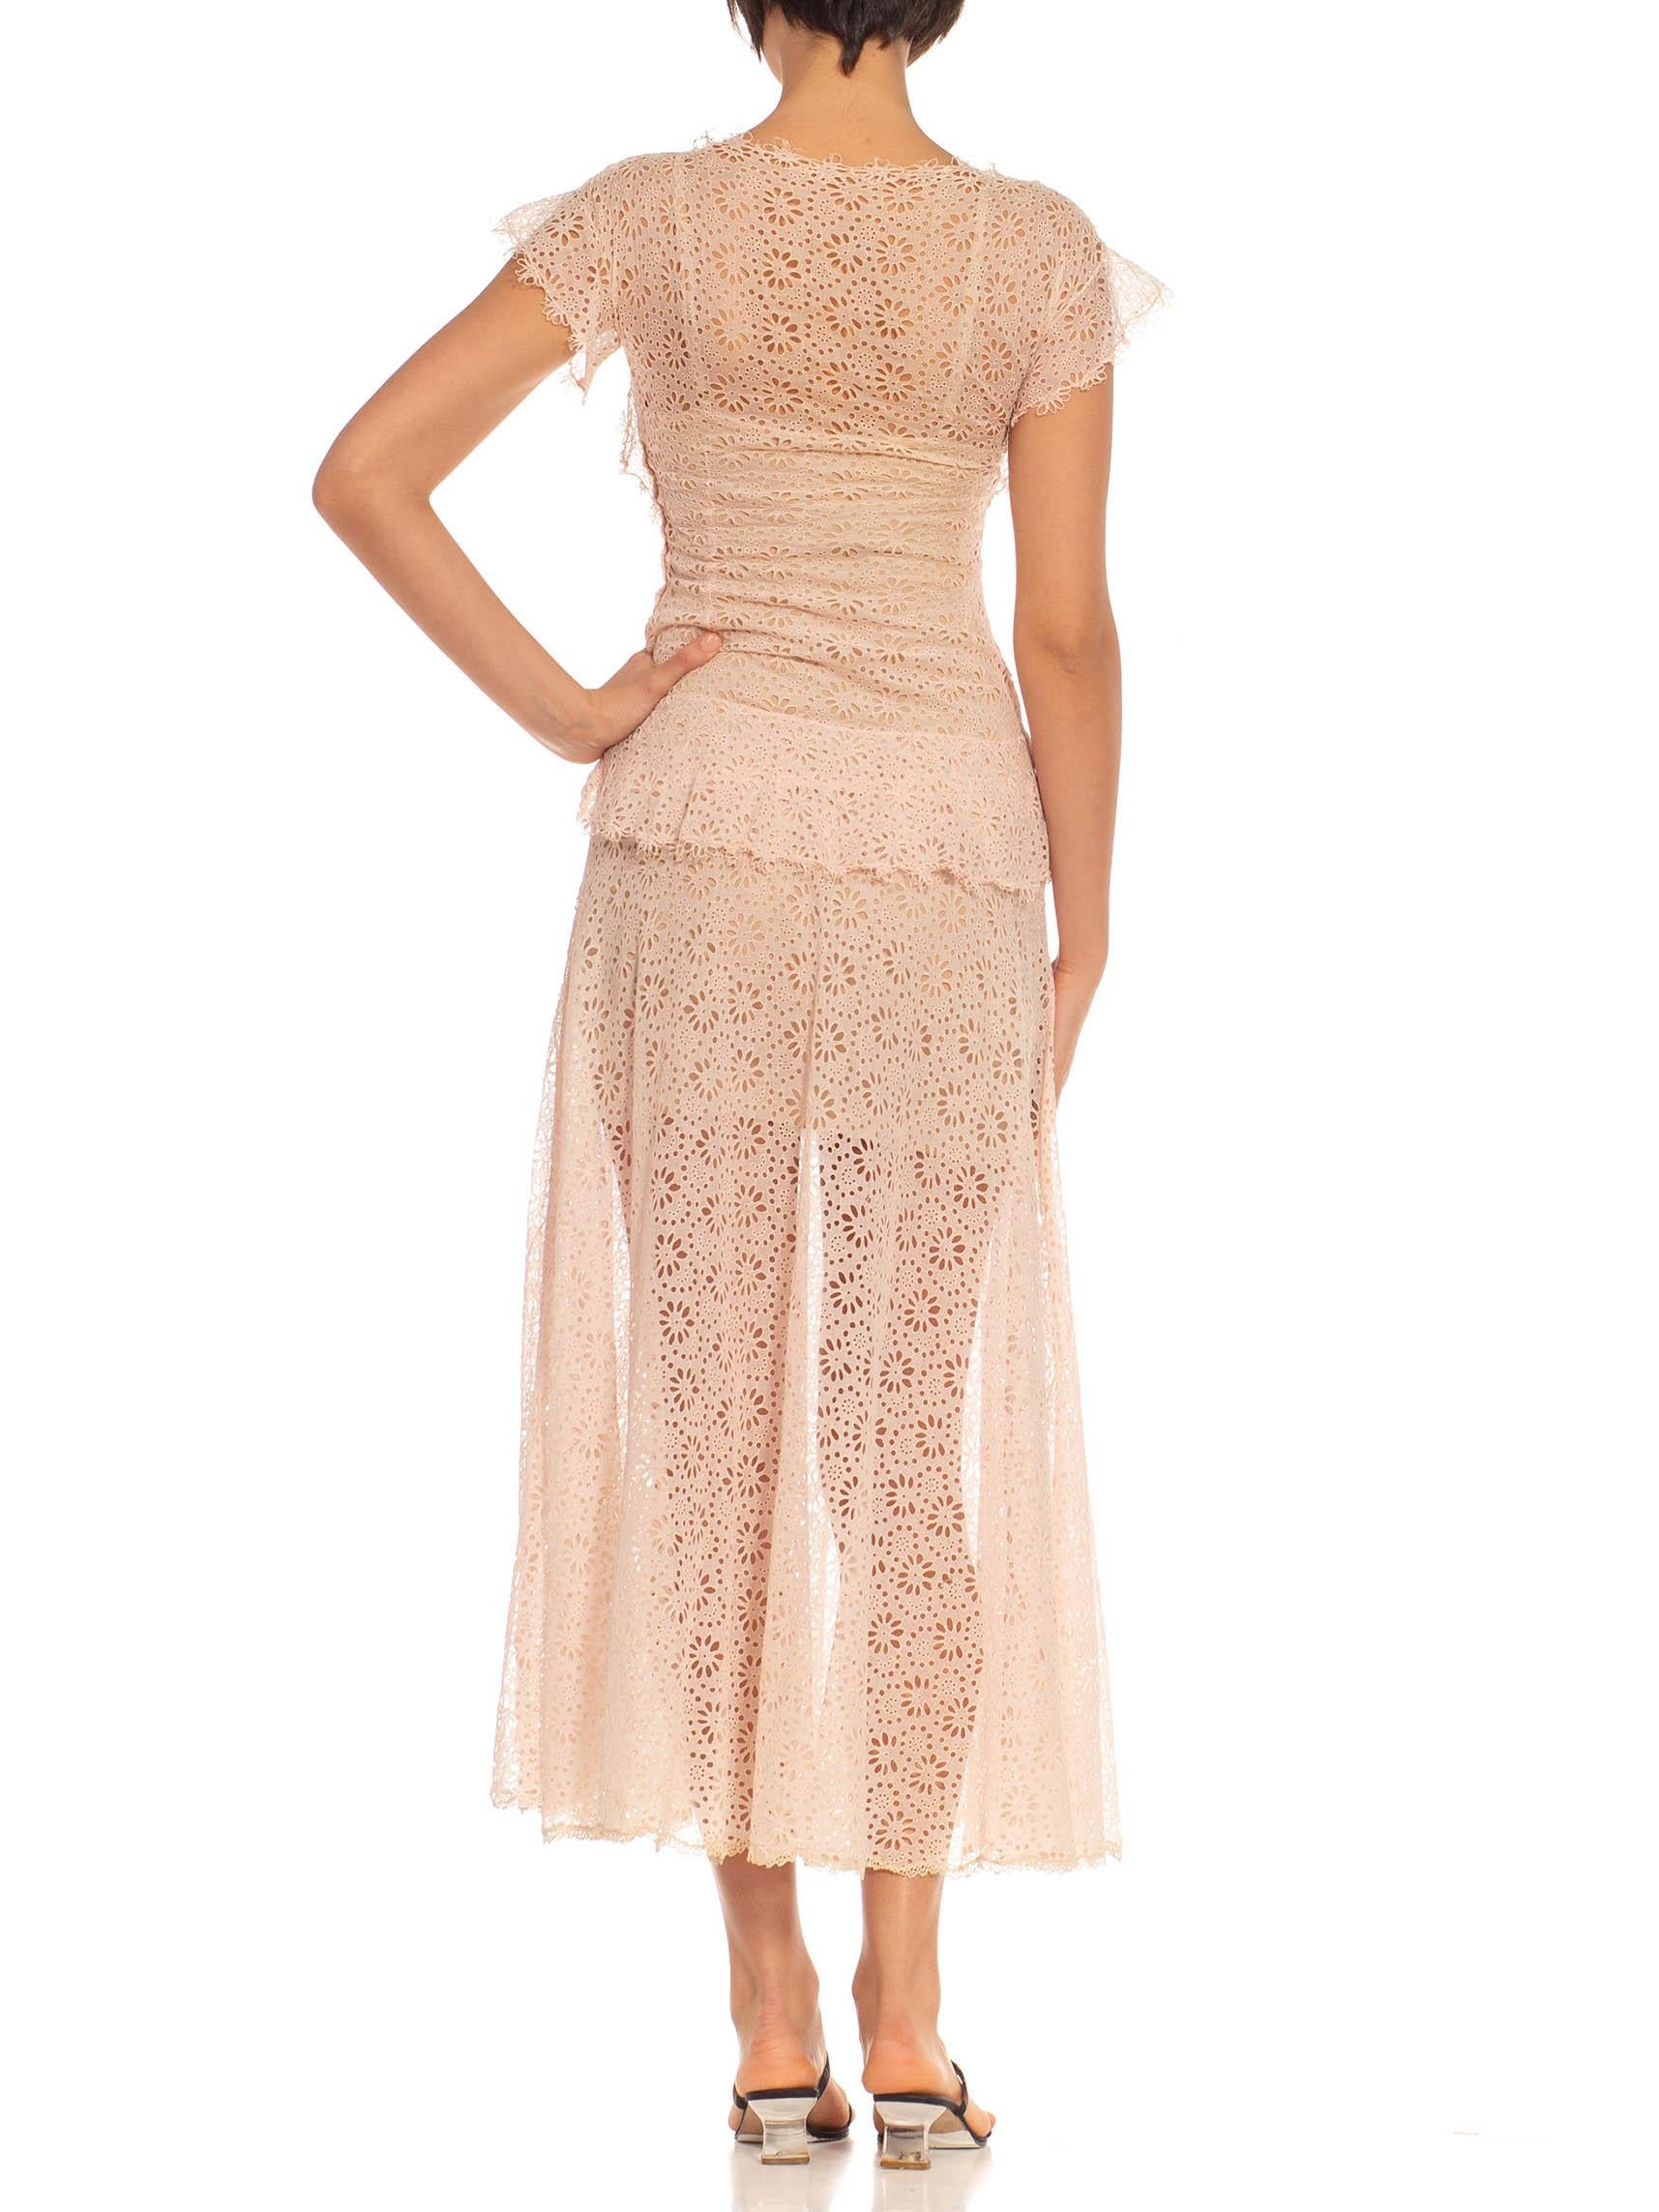 1940S Light Pink Cotton Eyelet Lace Dress For Sale 4